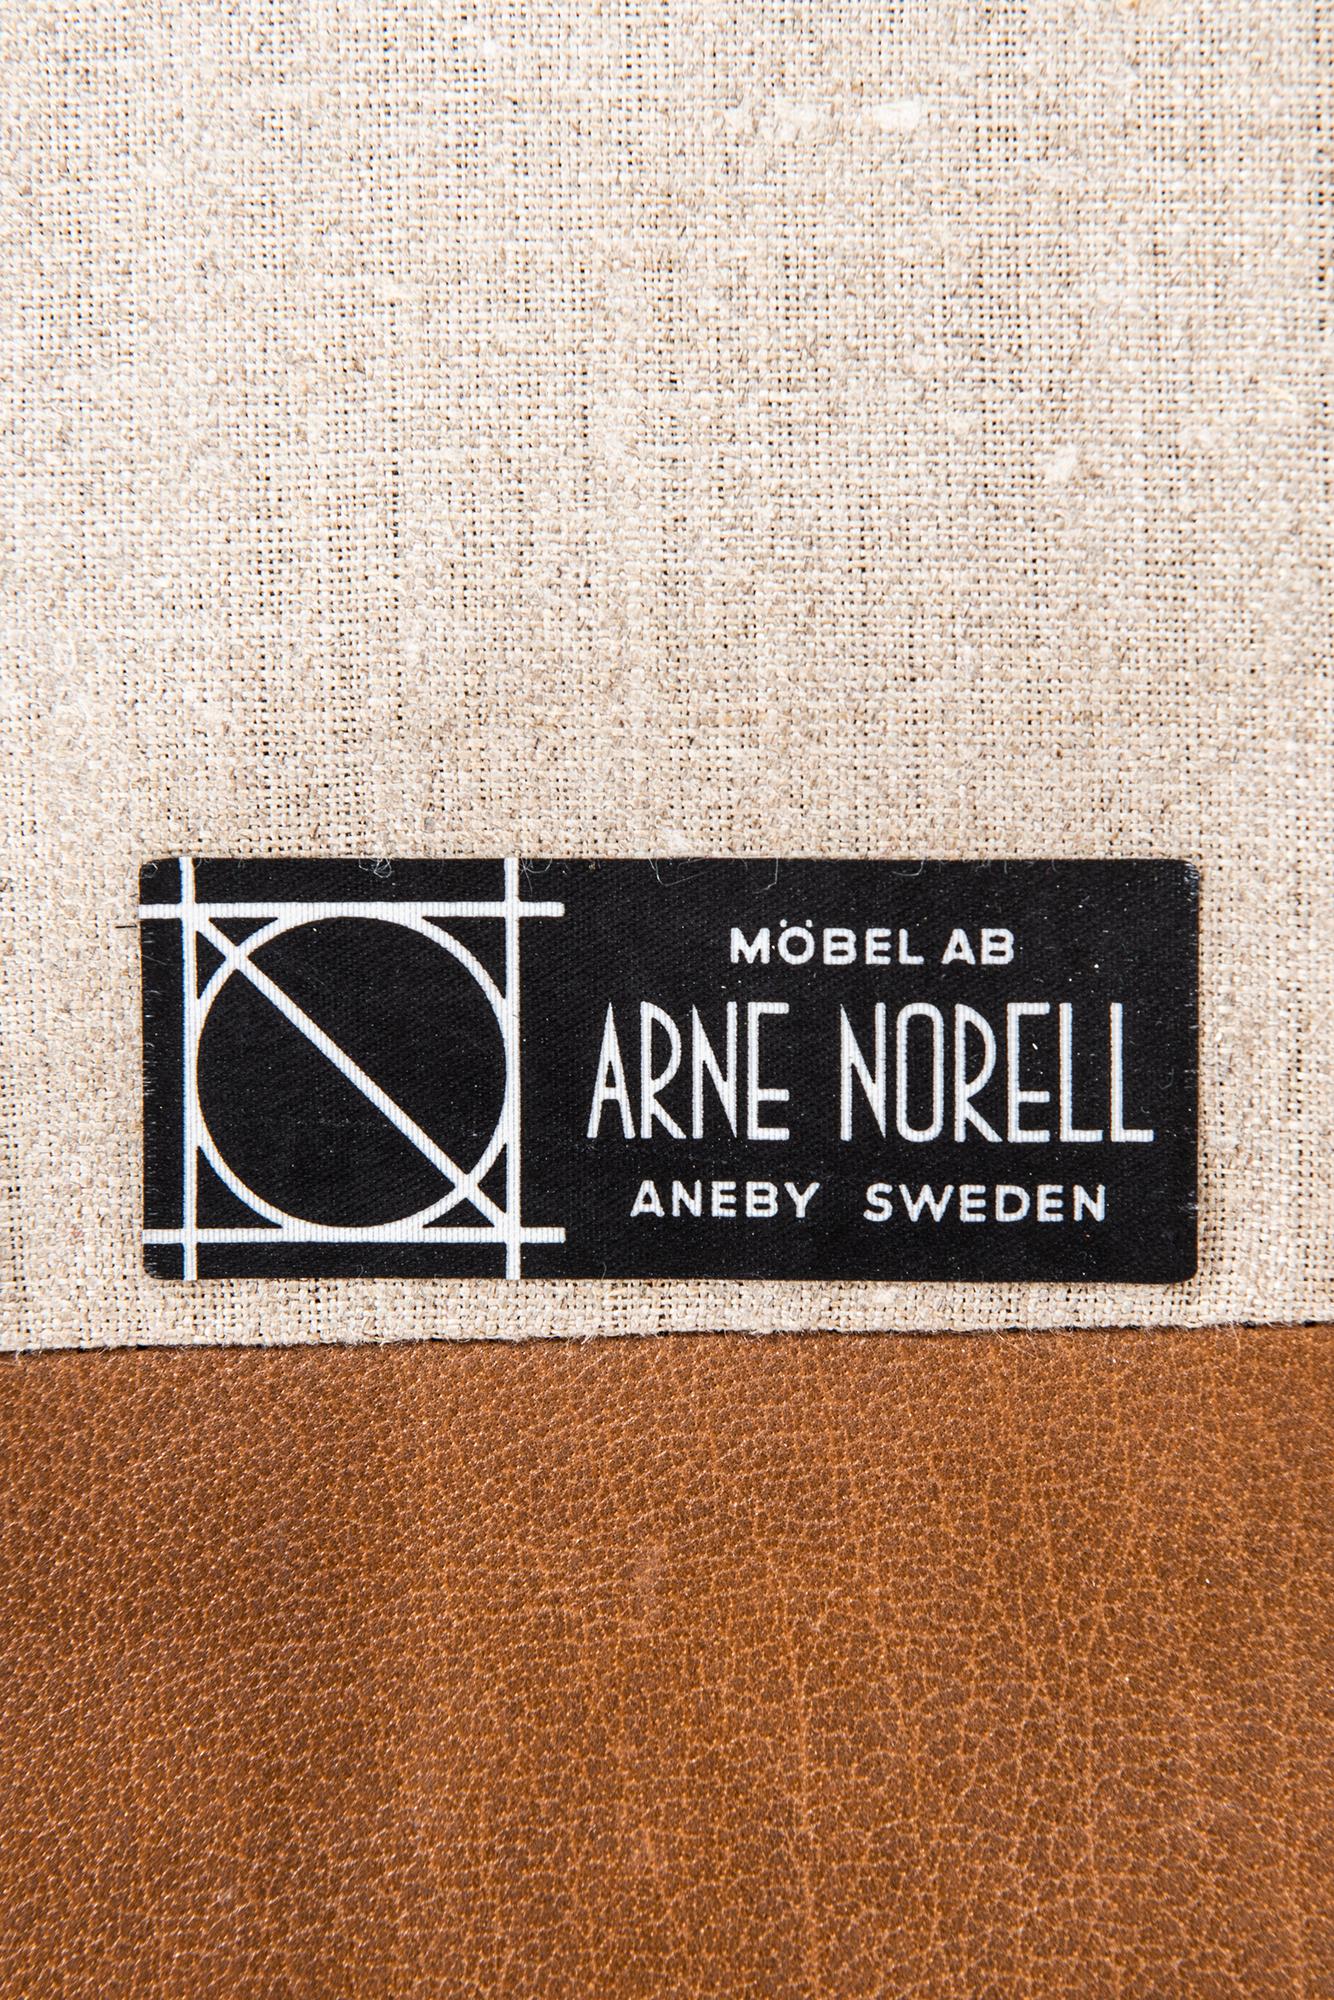 Arne Norell Easy Chair Model Löven by Arne Norell AB in Sweden In Excellent Condition For Sale In Limhamn, Skåne län